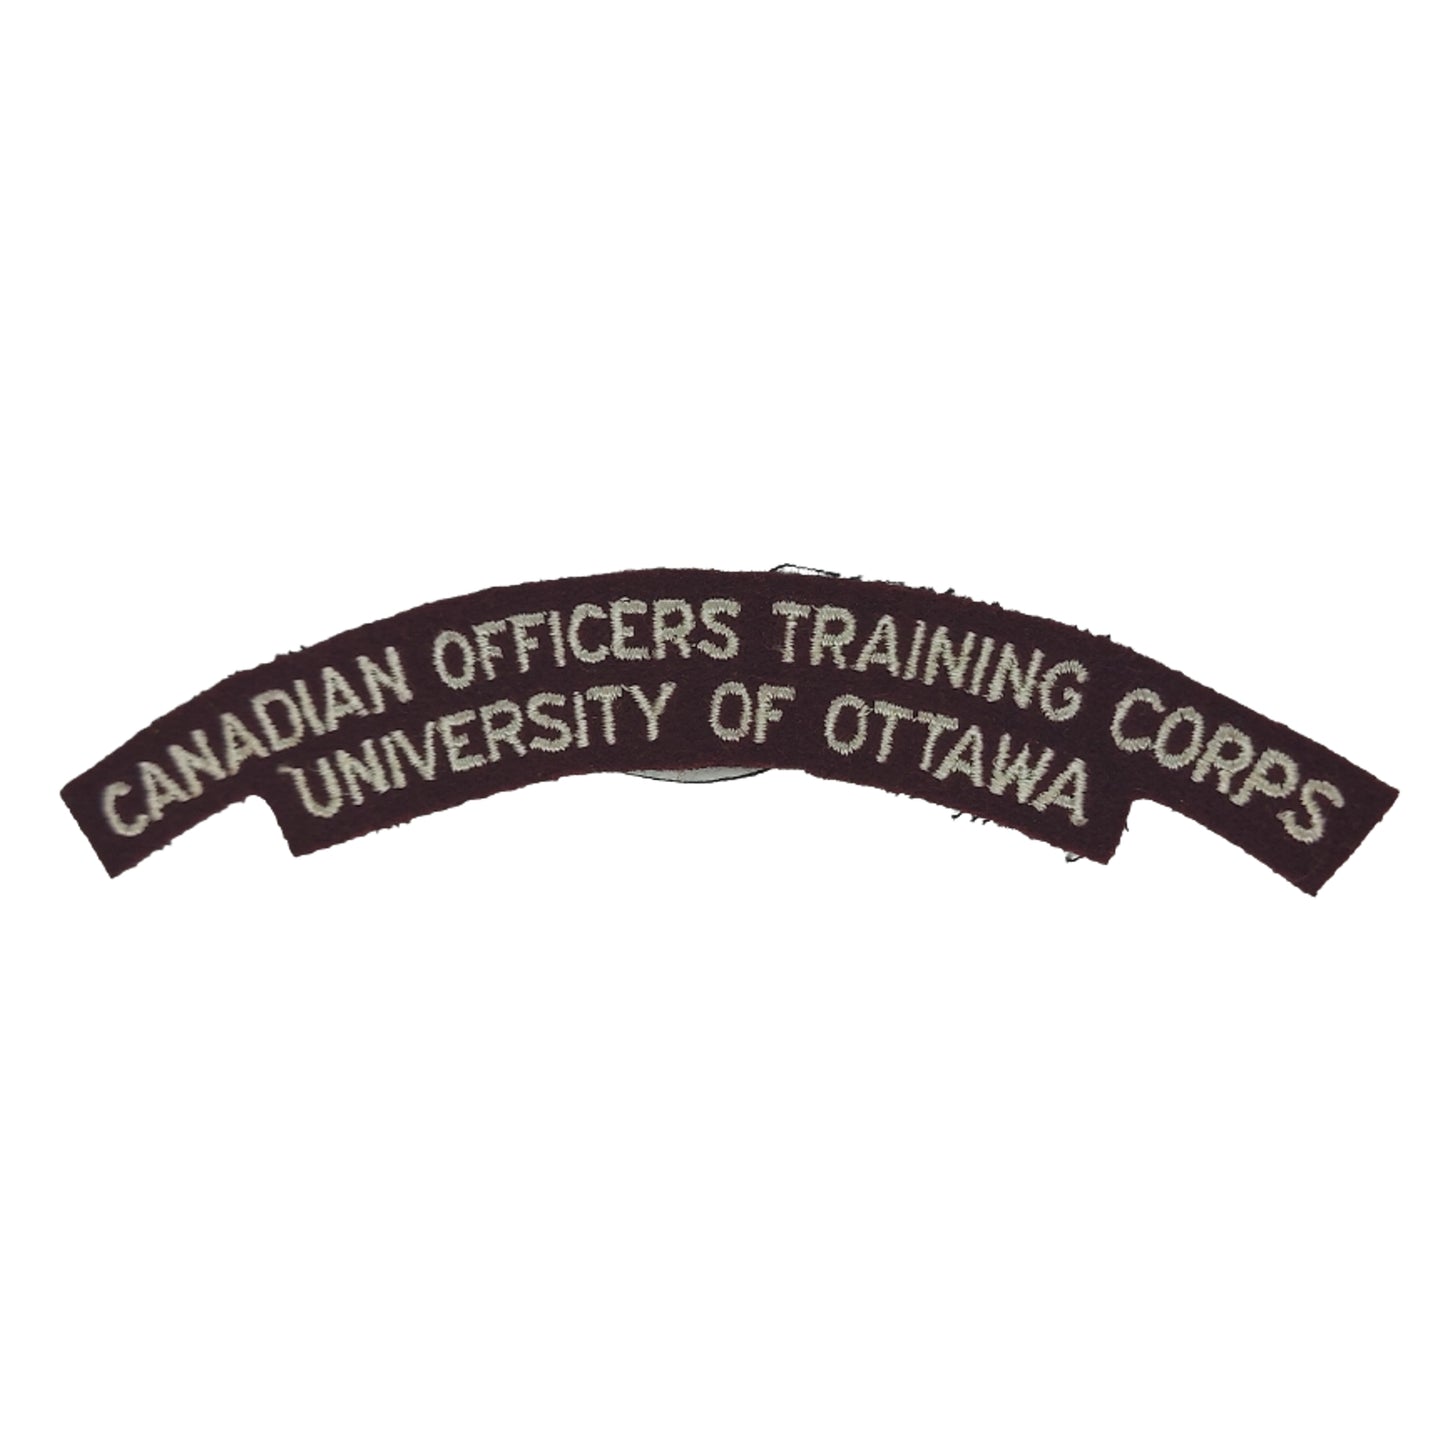 COTC Canadian Officers Training Corps University Of Ottawa Cloth Shoulder Title